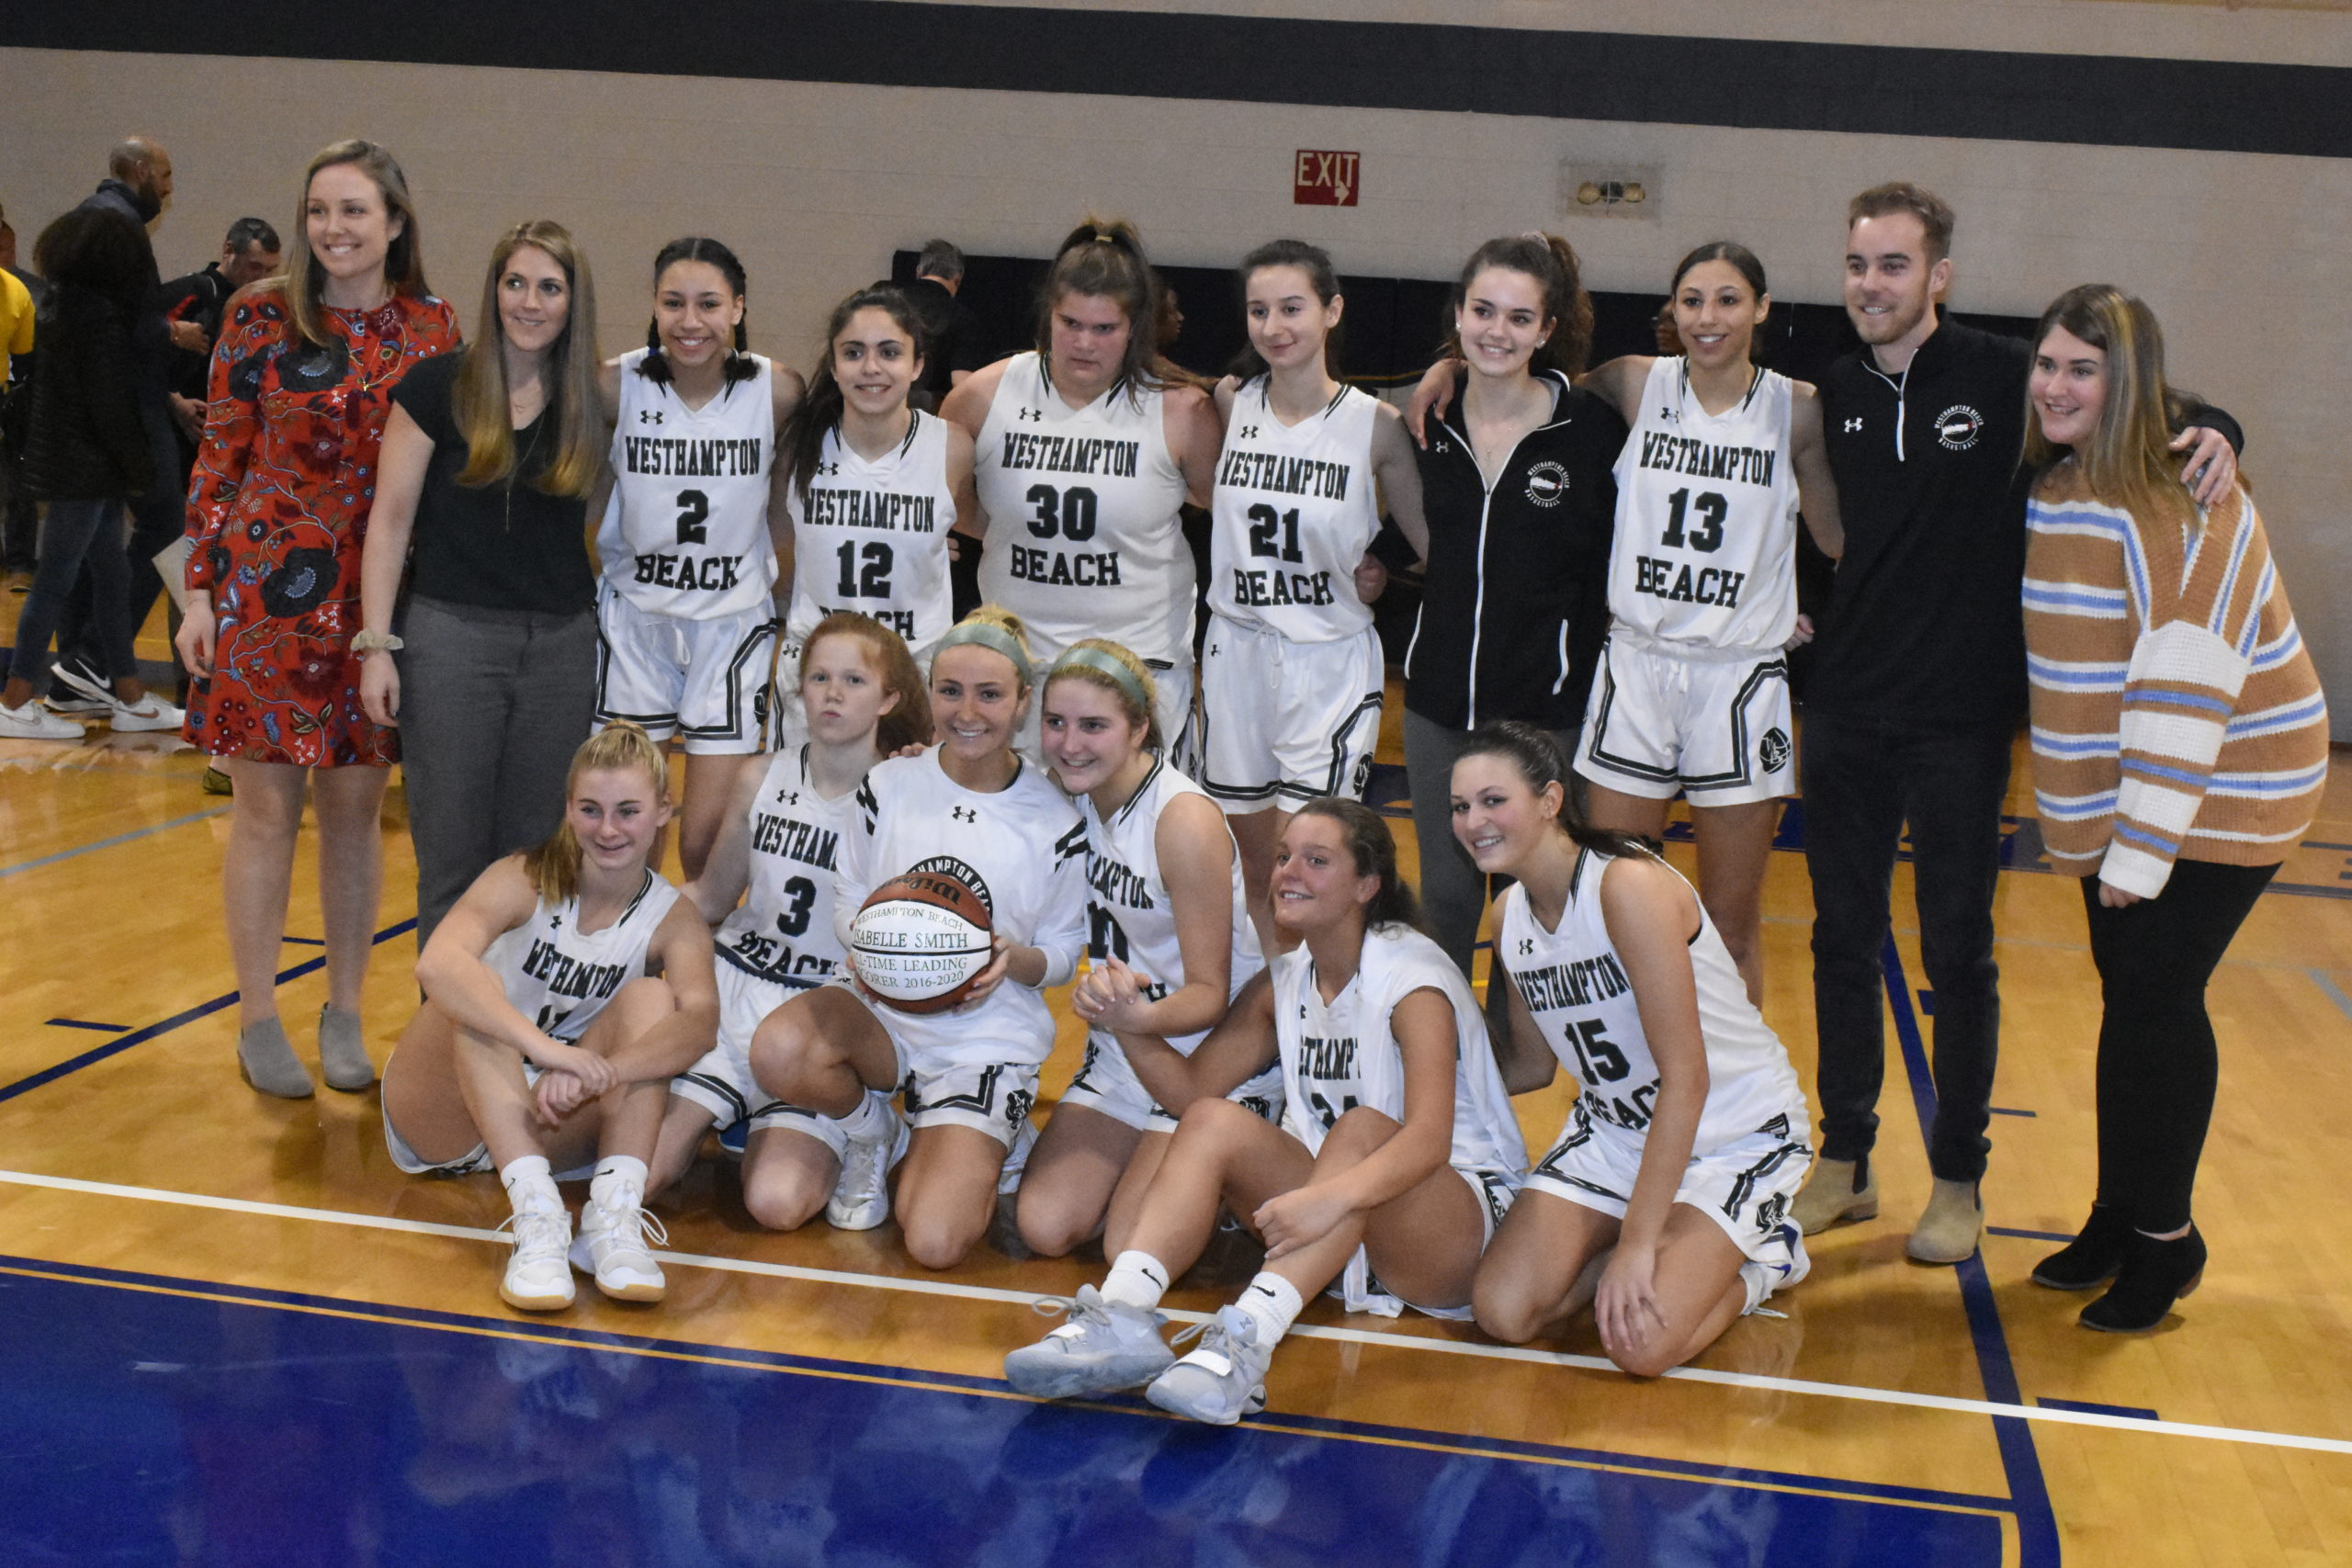 The Westhampton Beach girls basketball team after winning the Small Schools Championships.